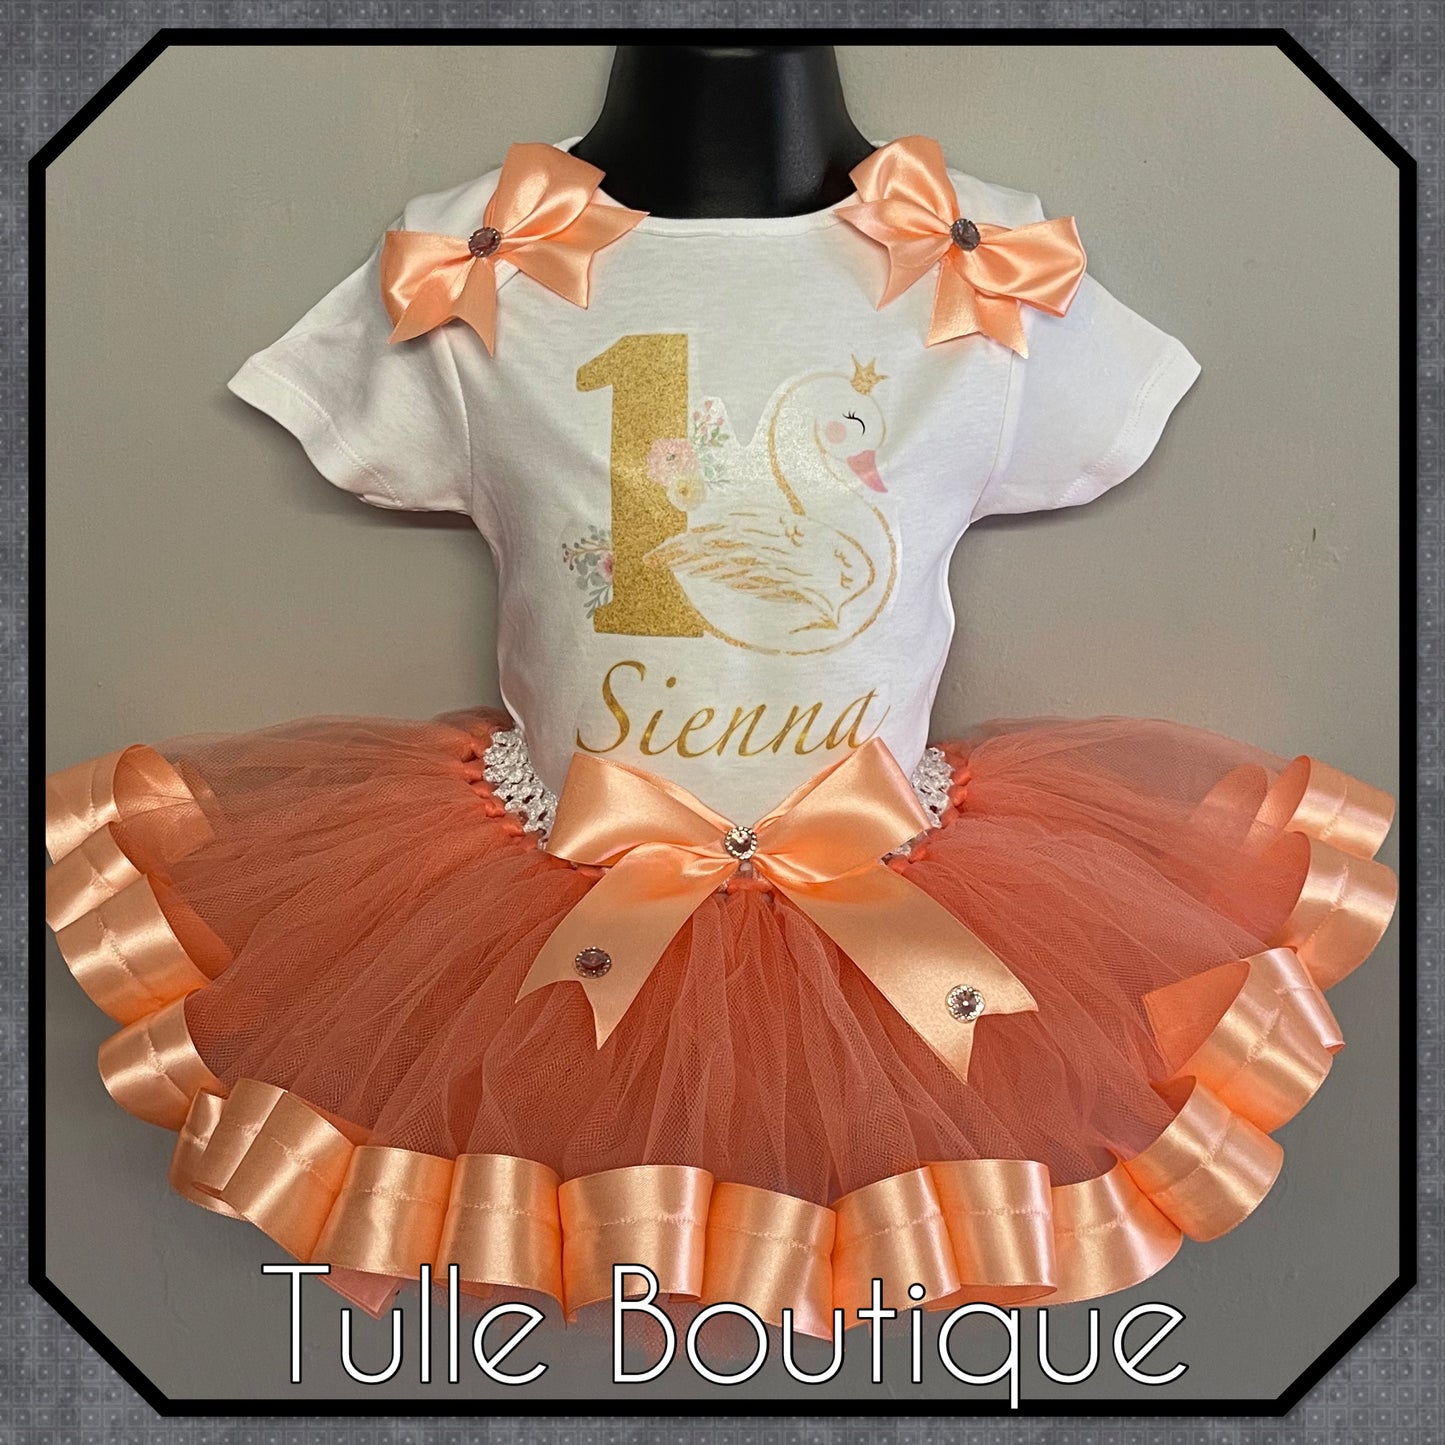 Swan princess ribbon trimmed tutu birthday party outfit